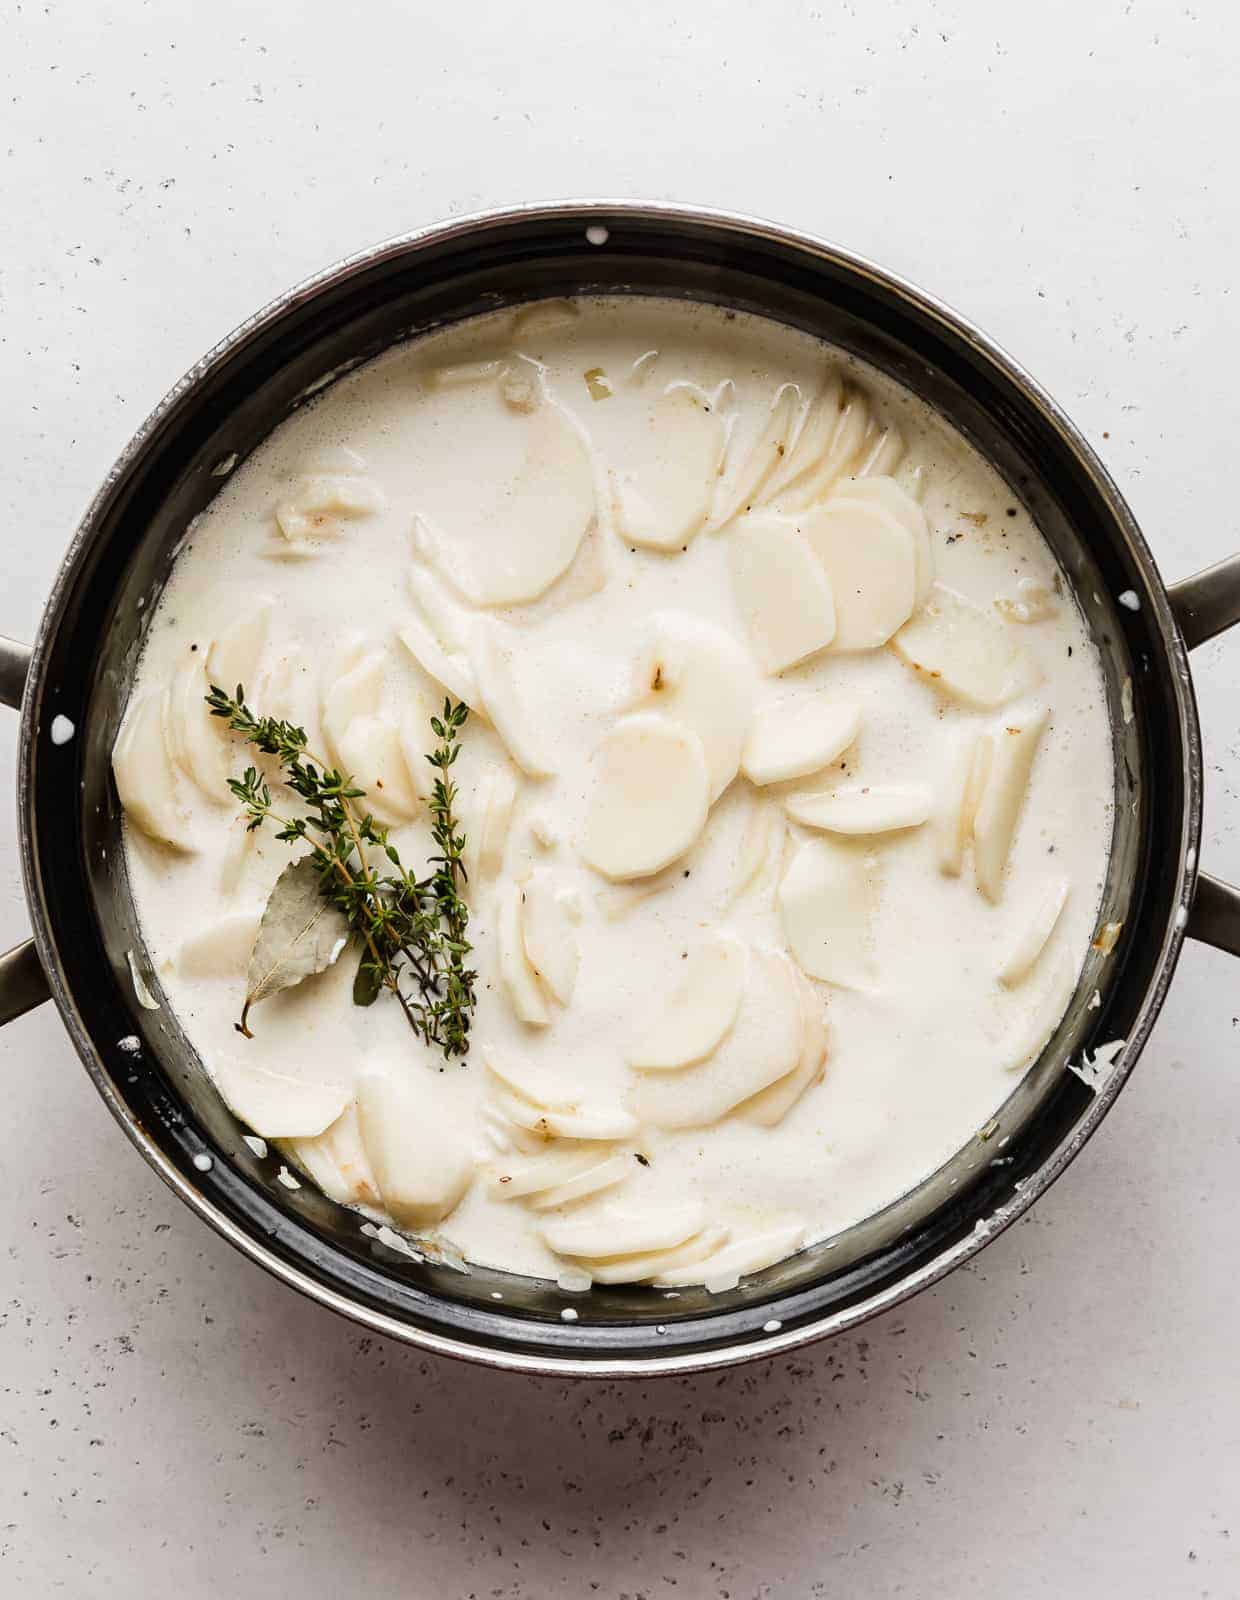 A large black pot full of heavy cream, thinly sliced potatoes, sprigs of thyme, and bay leaves.